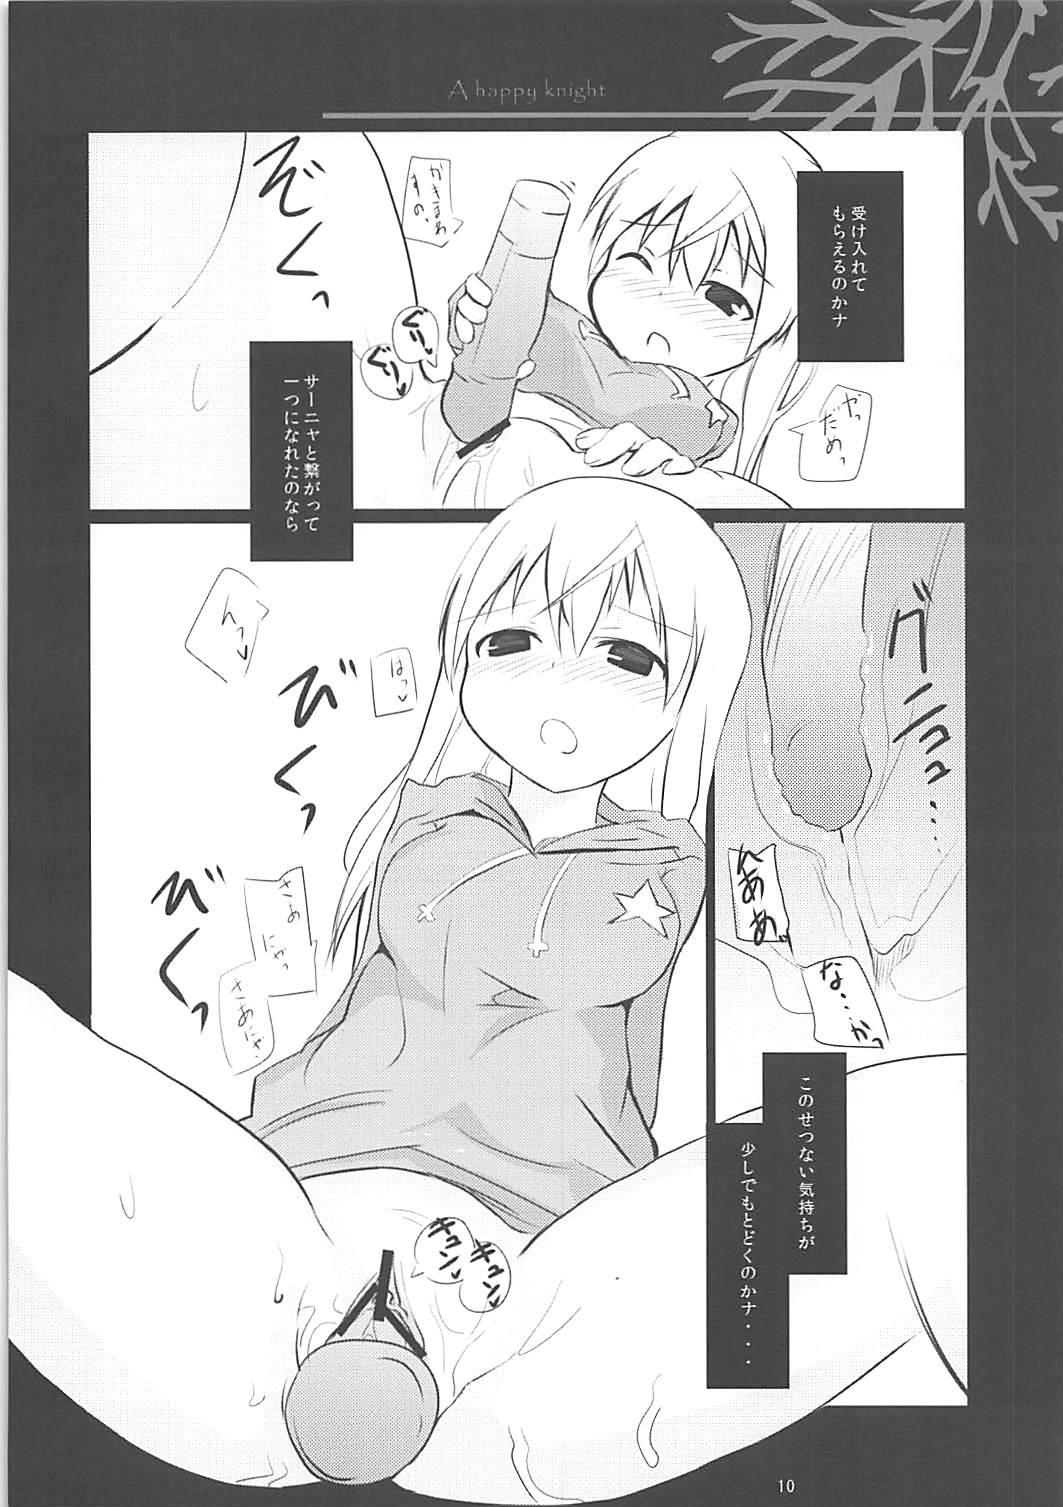 Perverted A happy knight - Strike witches Exgf - Page 9